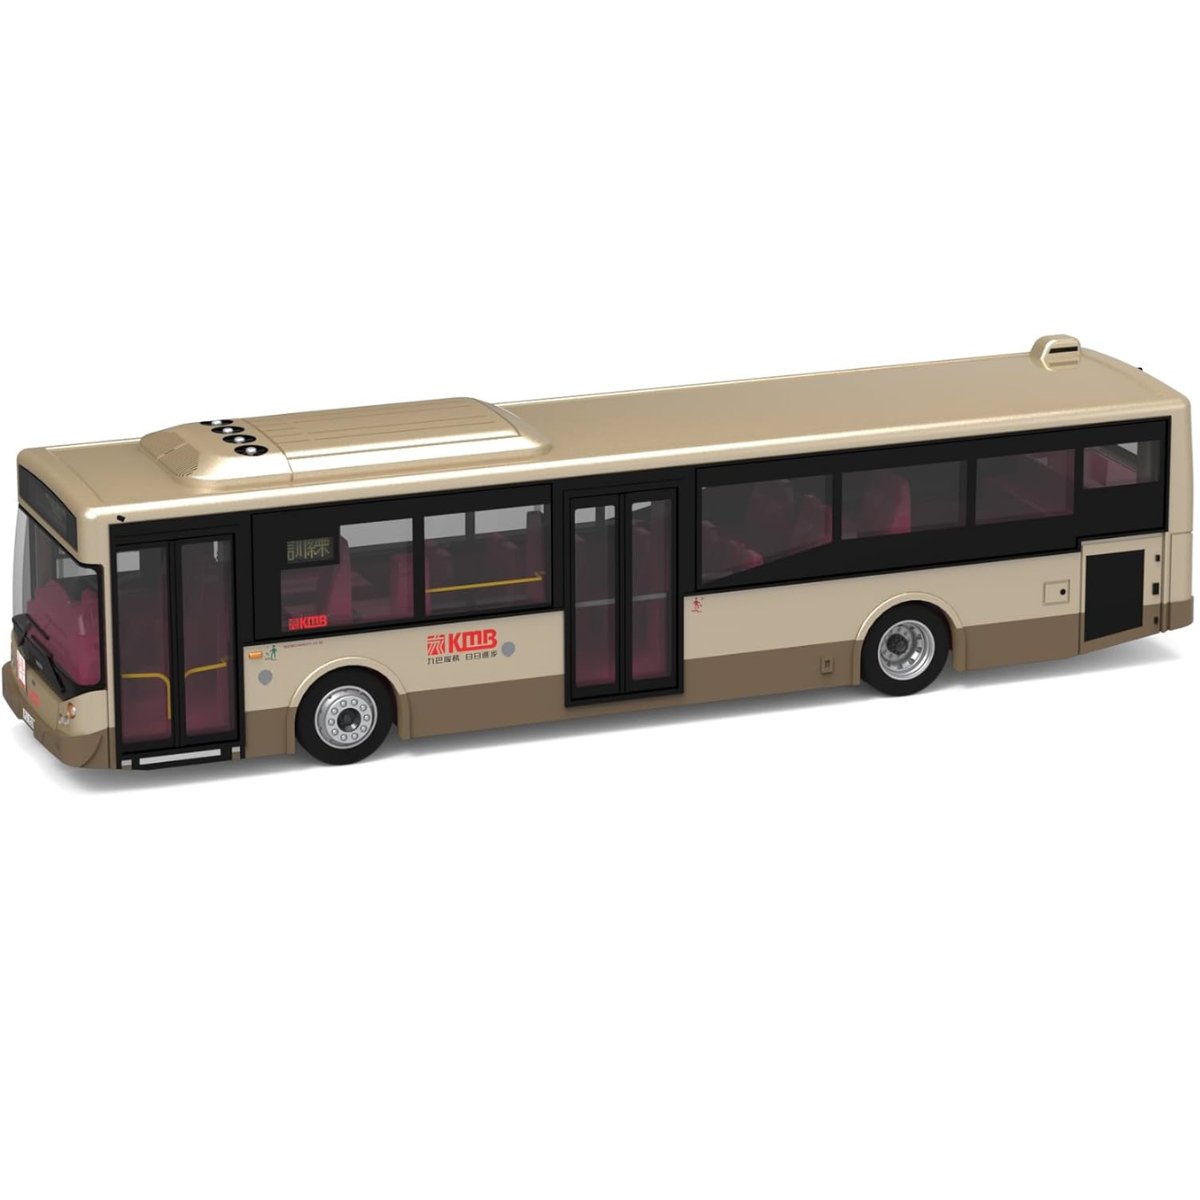 Tiny Models KMB Volvo B7RLE Training Bus (1:110 Scale) - Phillips Hobbies